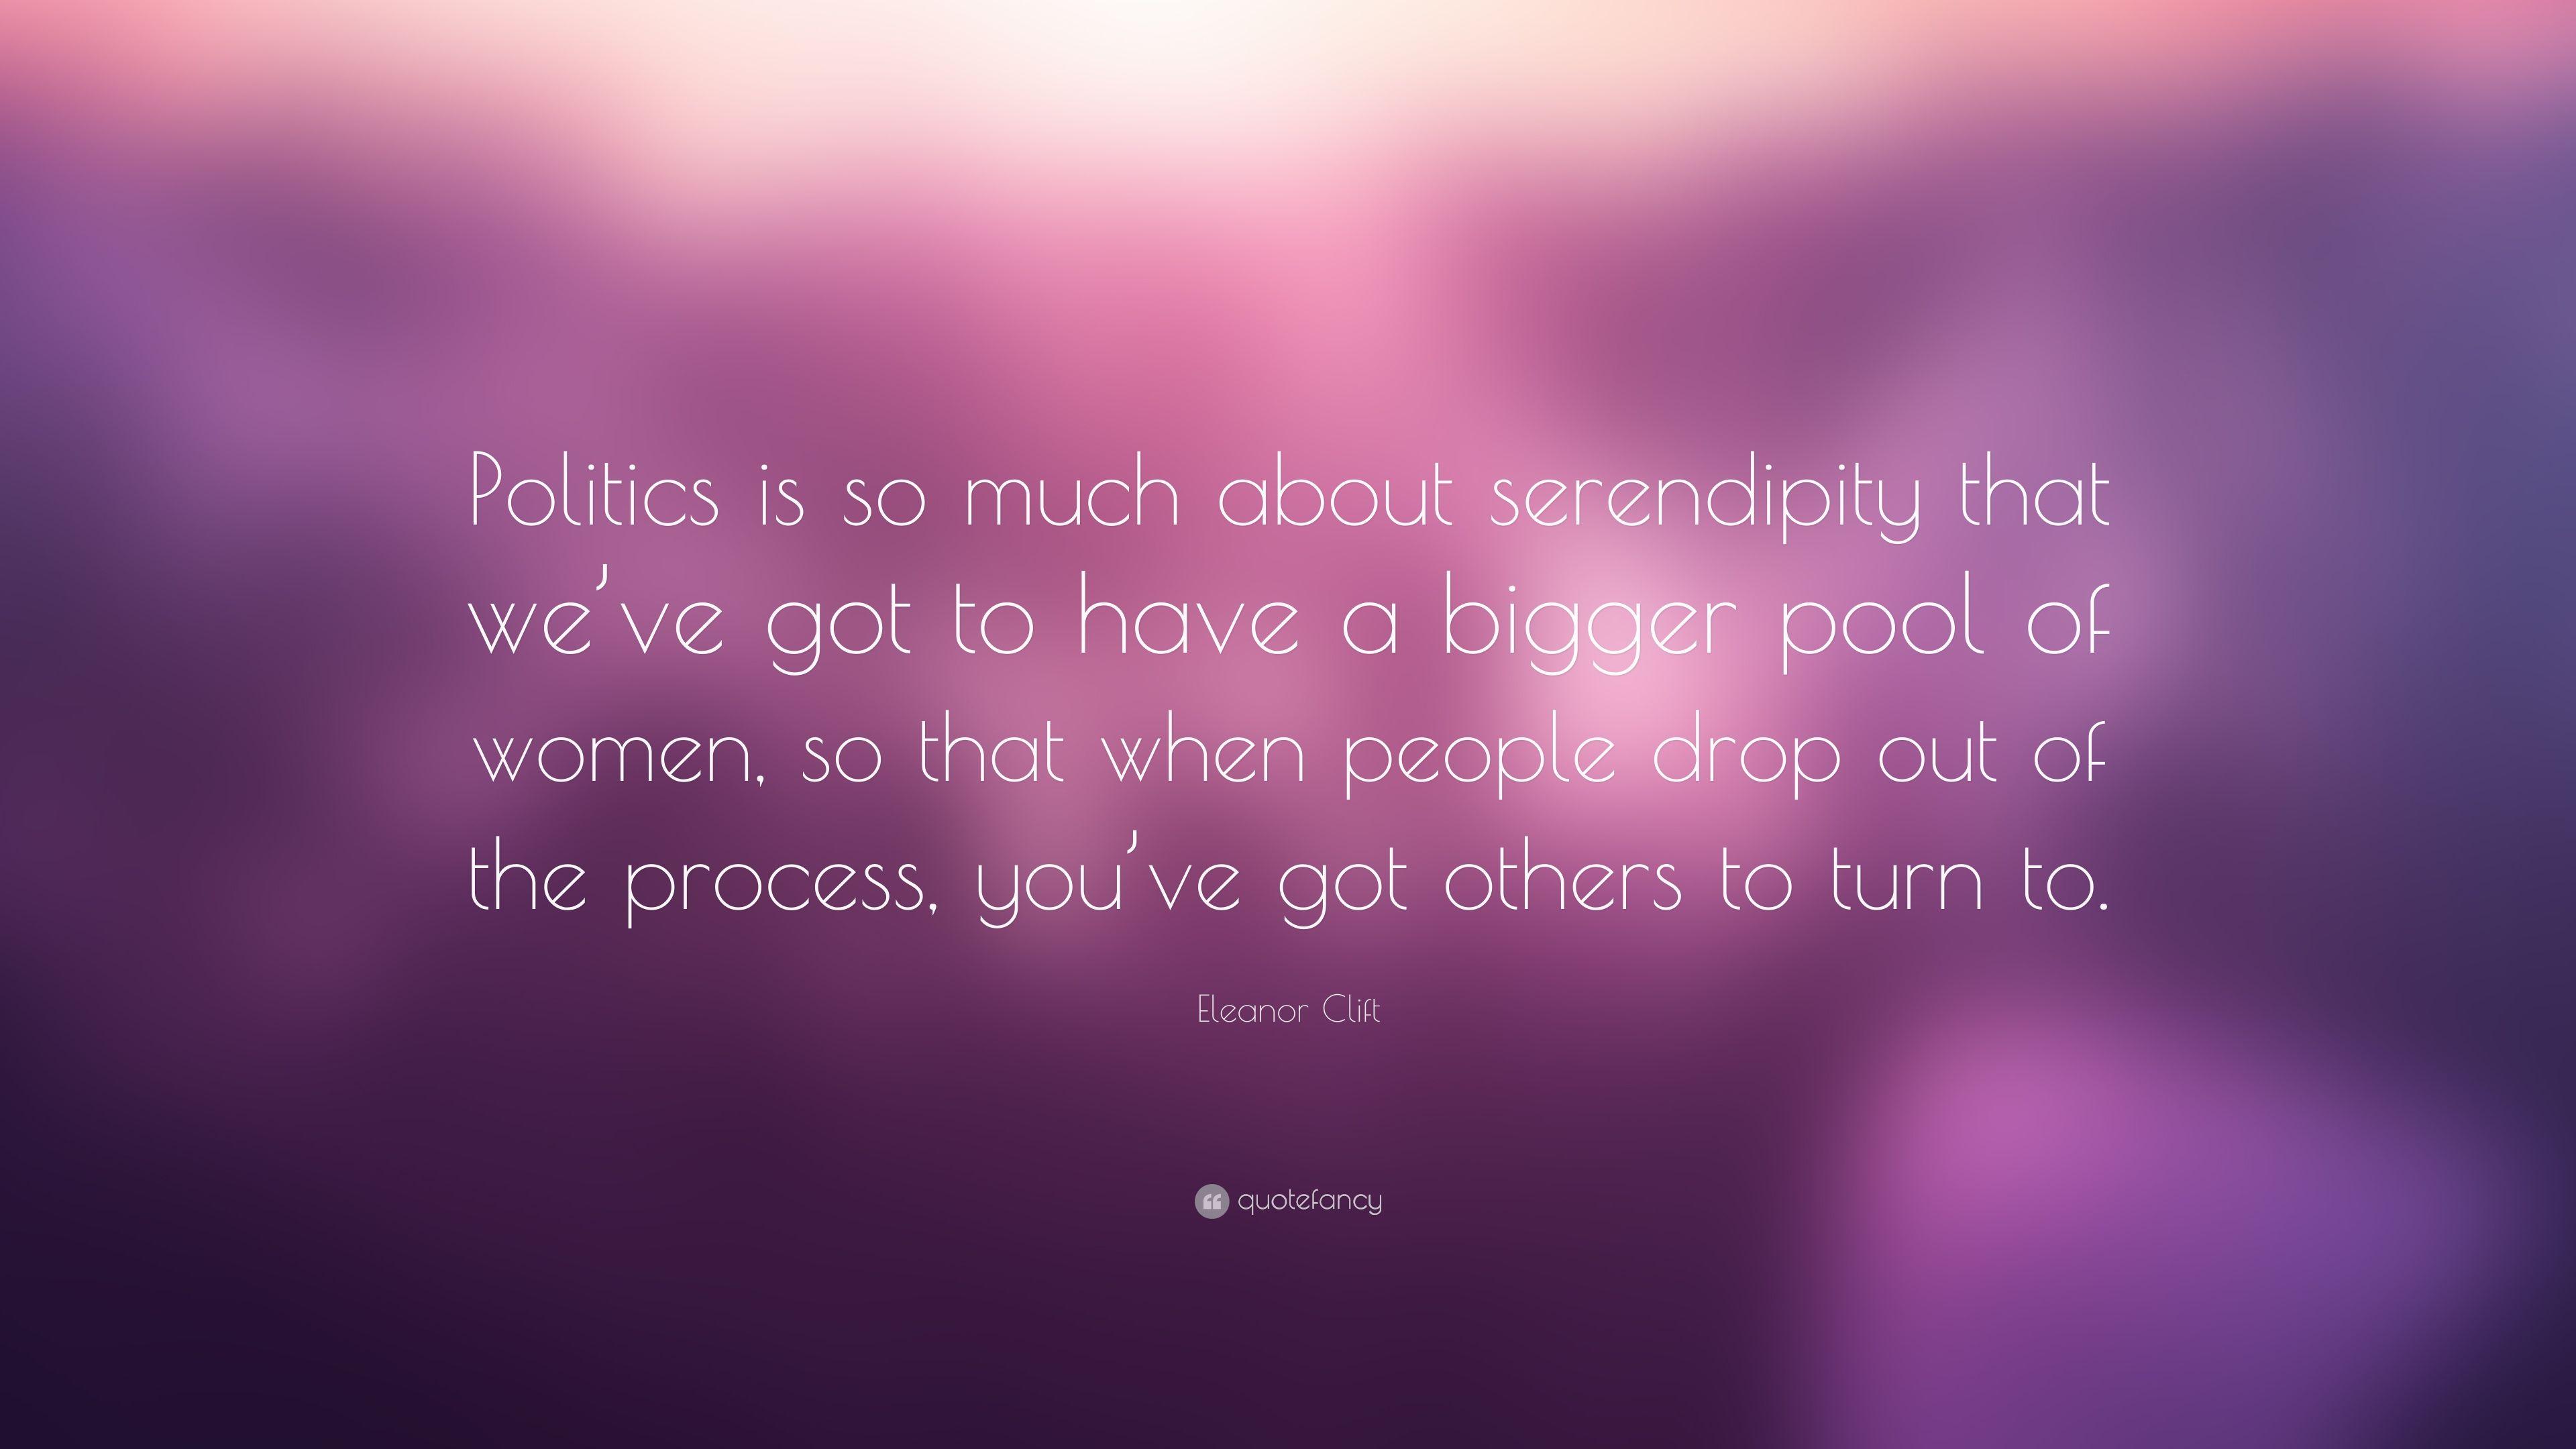 Eleanor Clift Quote: “Politics is so much about serendipity that we